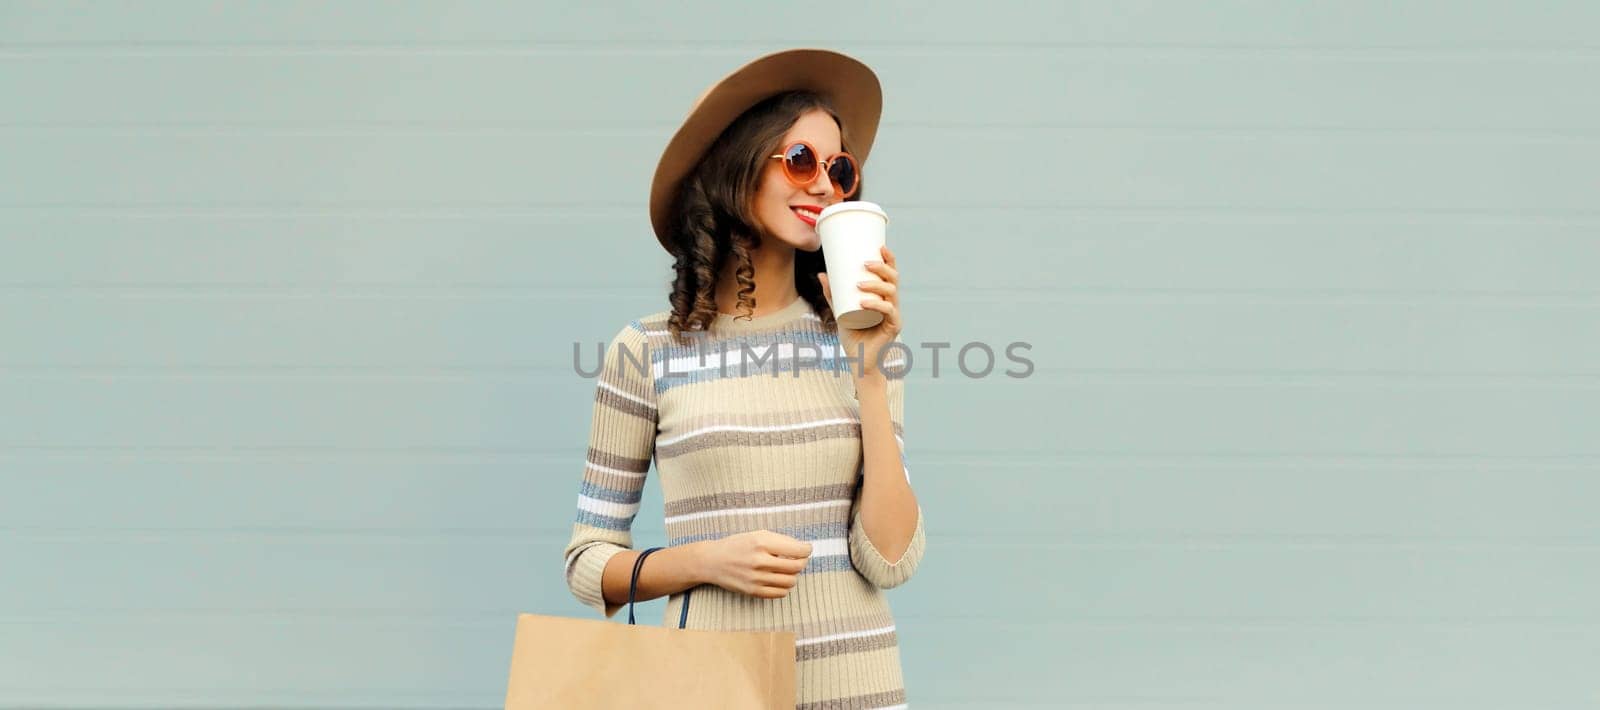 Stylish beautiful happy smiling young woman posing with shopping bags in round hat, dress on city street